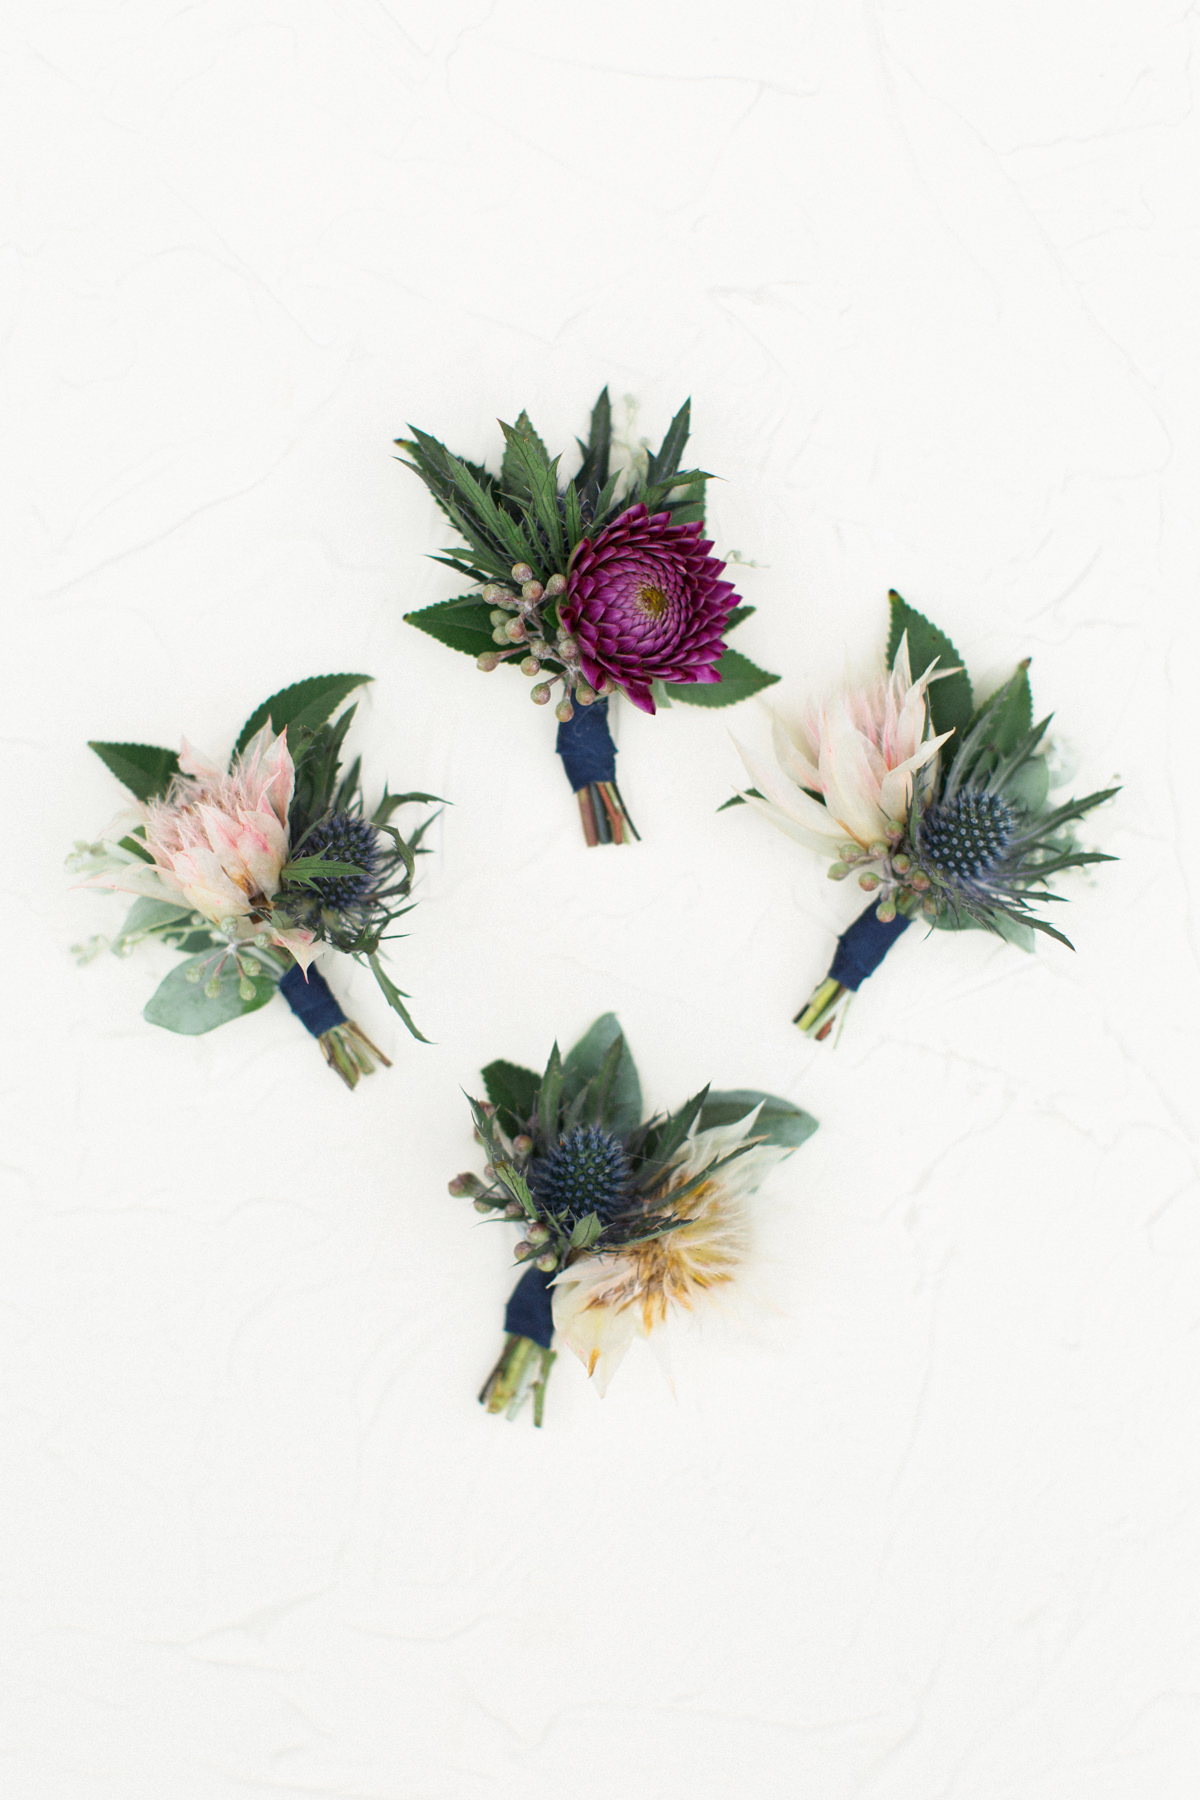 Photosynthesis Floral Design-Amy Nicole Photography